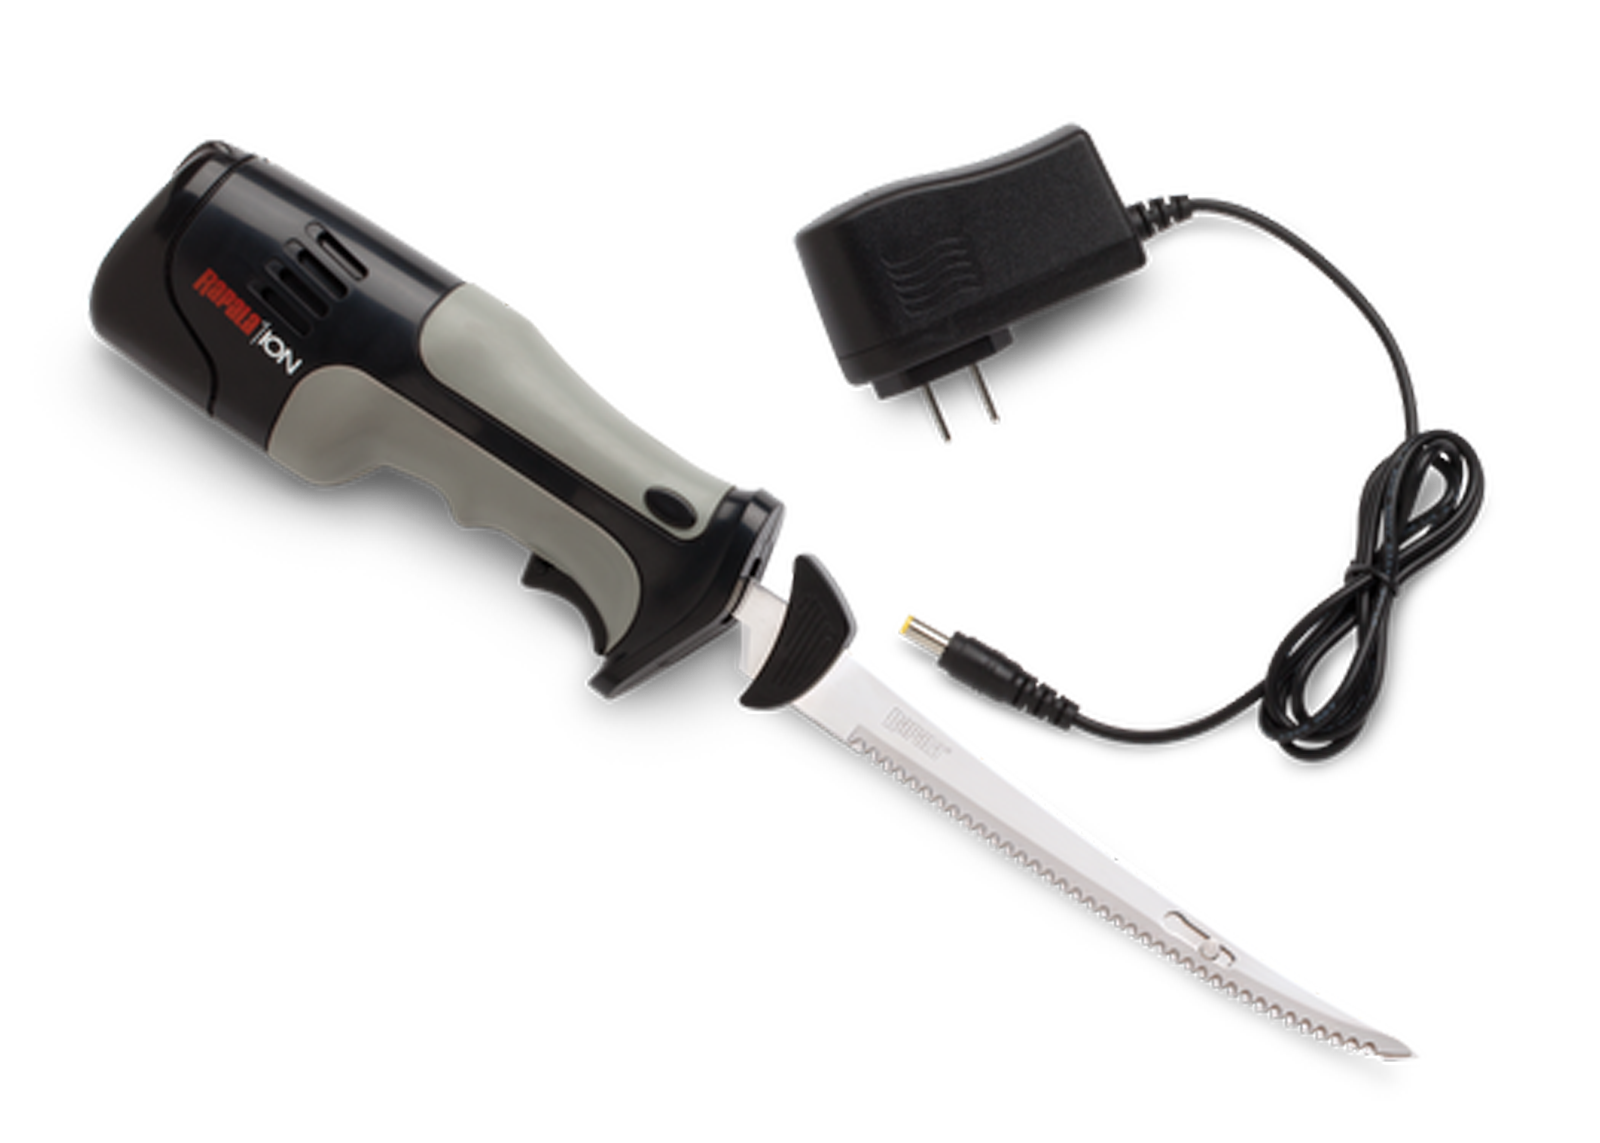 RAPALA LITHIUM ION CORDLESS FILLET KNIFE